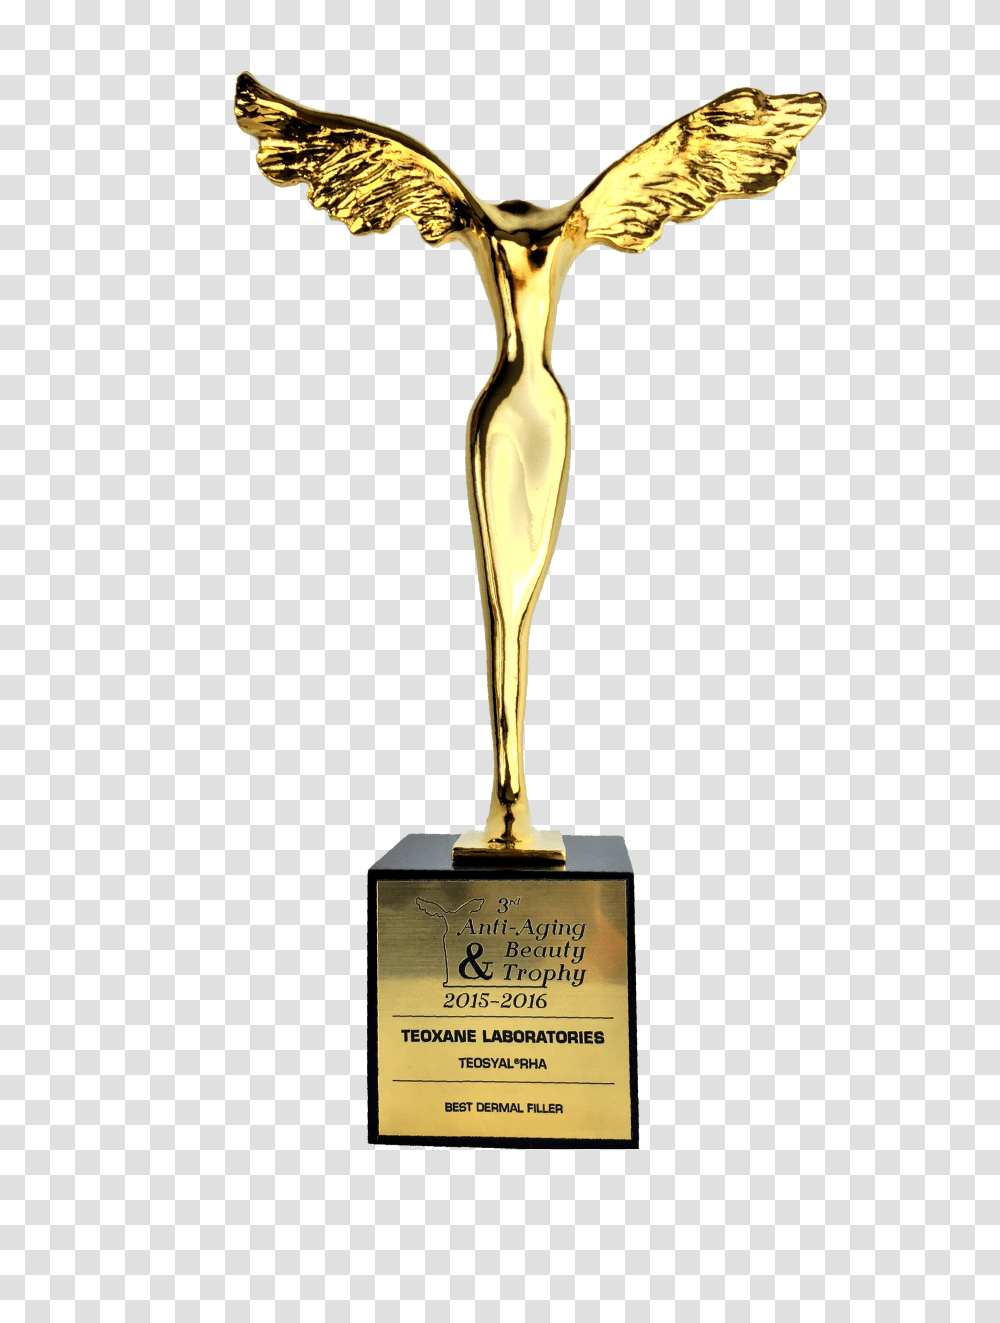 Prize And Awards Anti Aging Amp Beauty Trophy 2013, Cross, Crucifix Transparent Png